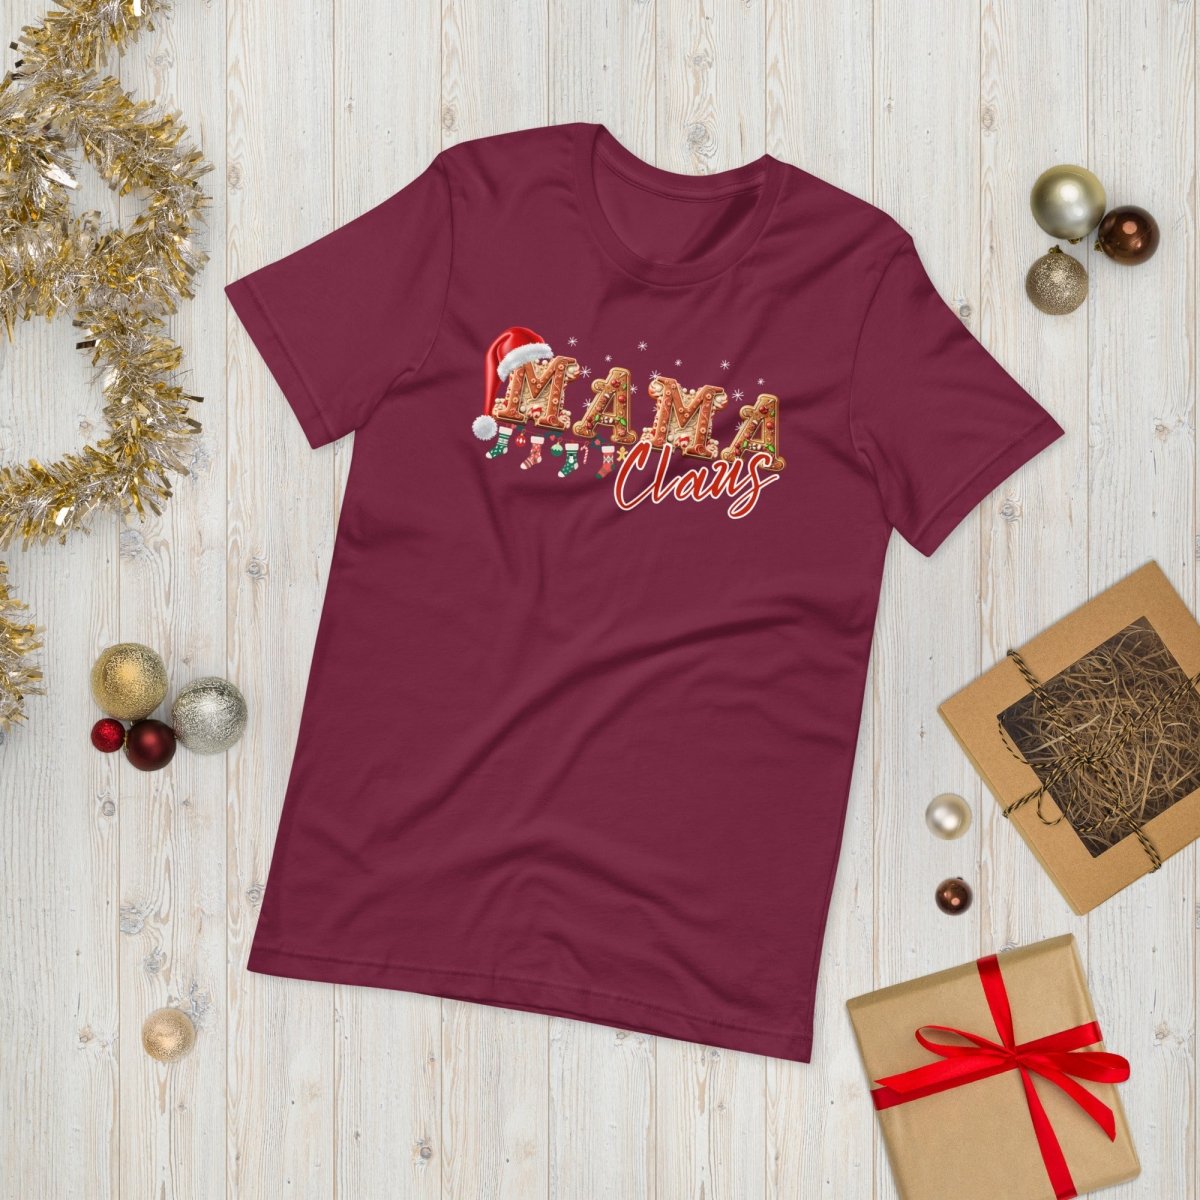 Mama Claus Christmas T-Shirt - High Quality Funny Unisex T-Shirt, Gingerbread Letters Shirt Design, Christmas Vacation Tee, Family Xmas Tee - Everything Pixel